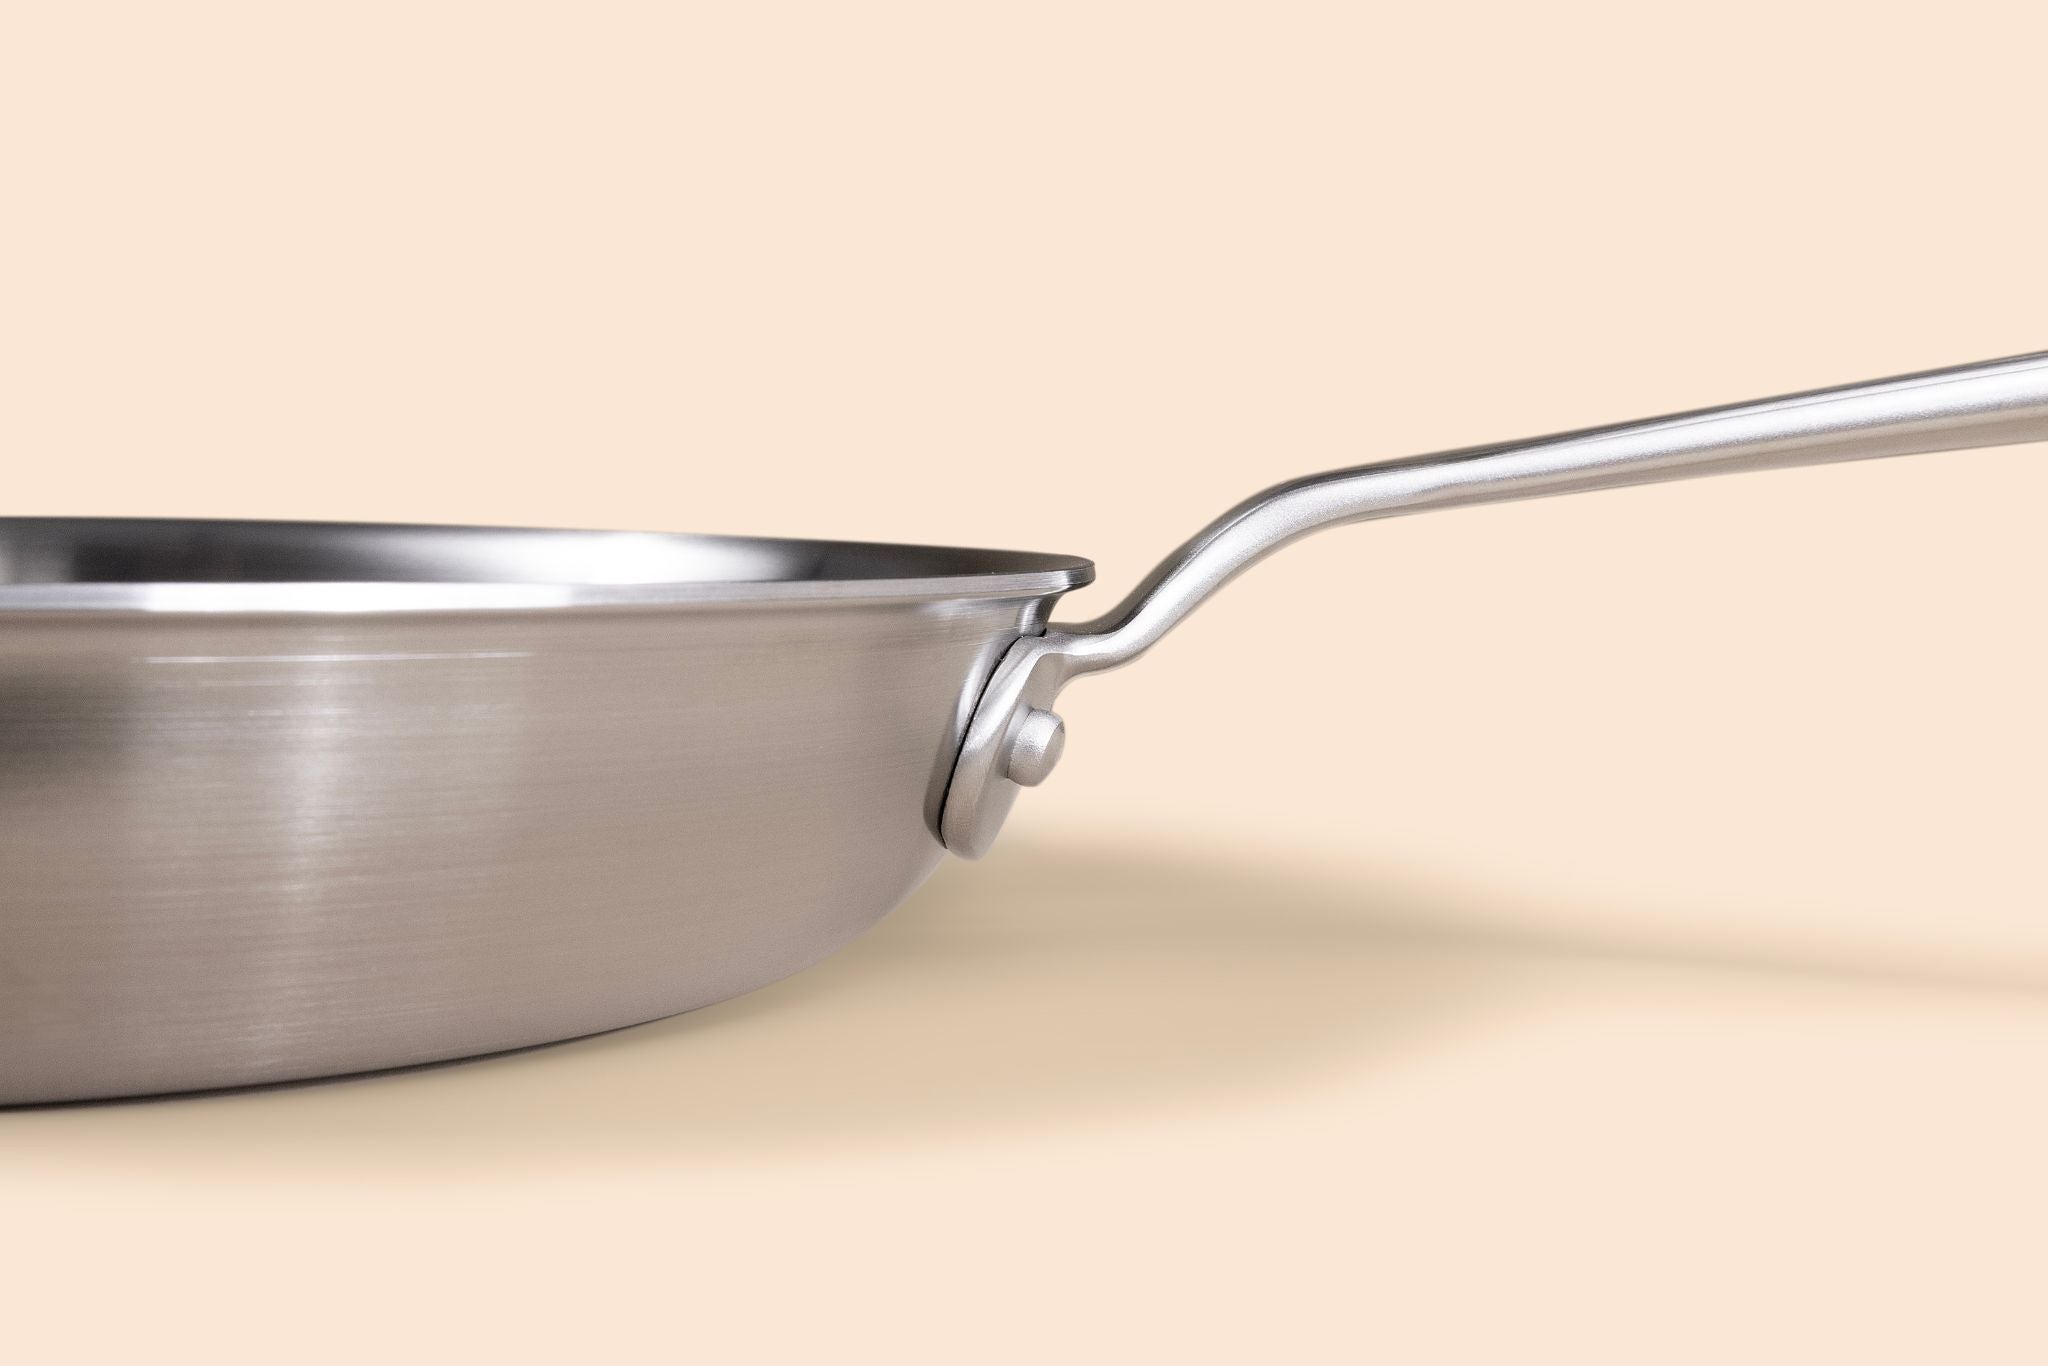 KitchenAid Frying Pan, Non Stick Stainless Steel Pan with Stainless Handle  - Induction, Oven & Dishwasher Safe - 20 cm